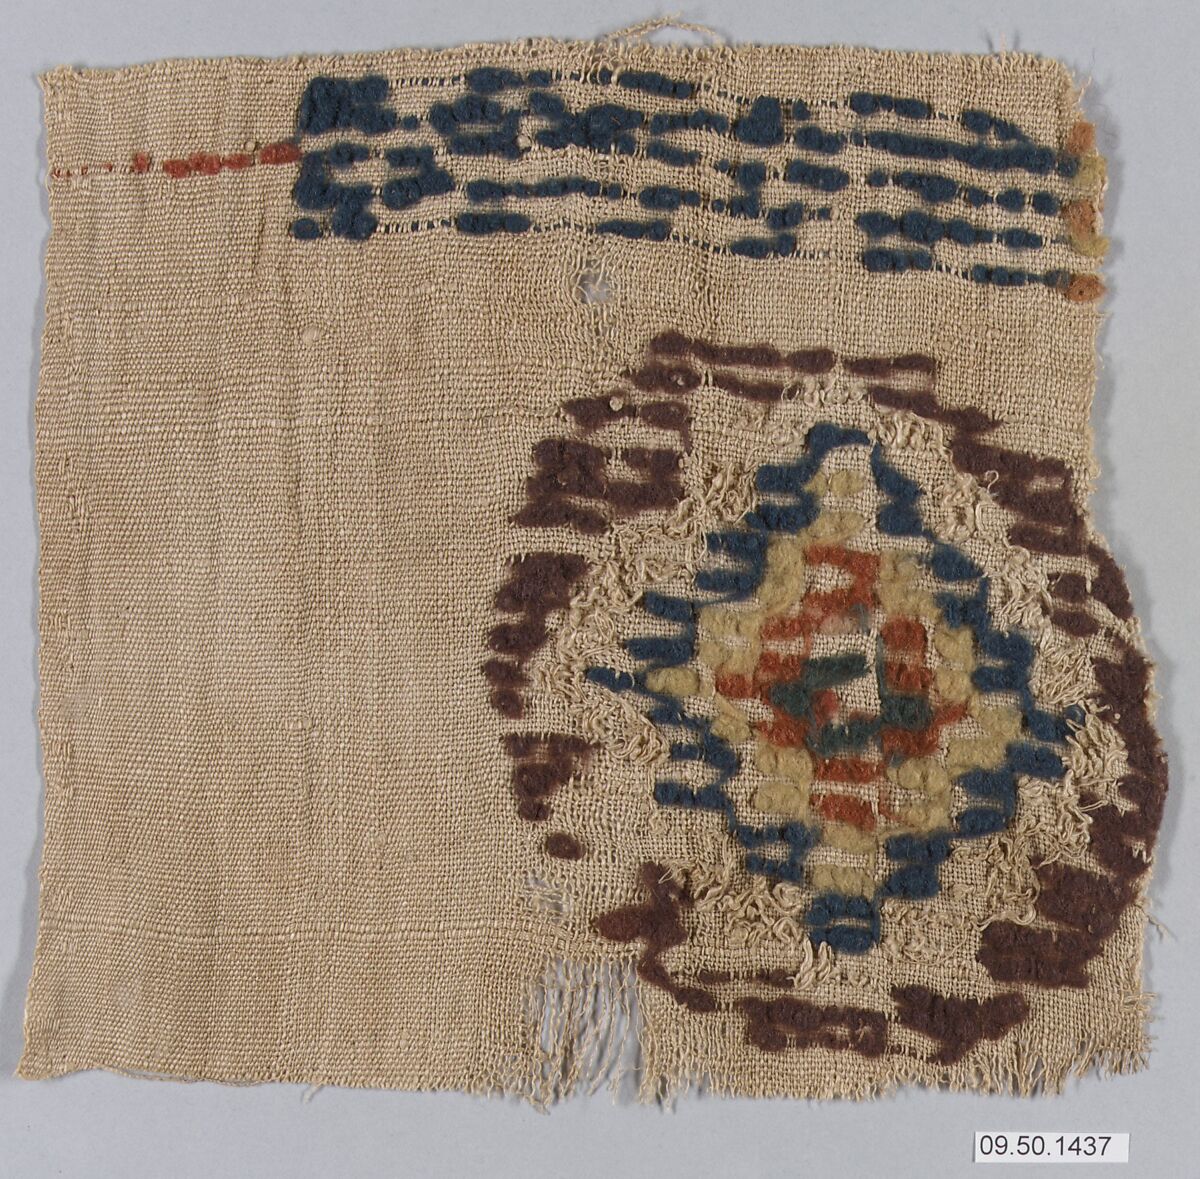 Textile Fragment, Linen, wool; tapestry weave, looped embroidery 